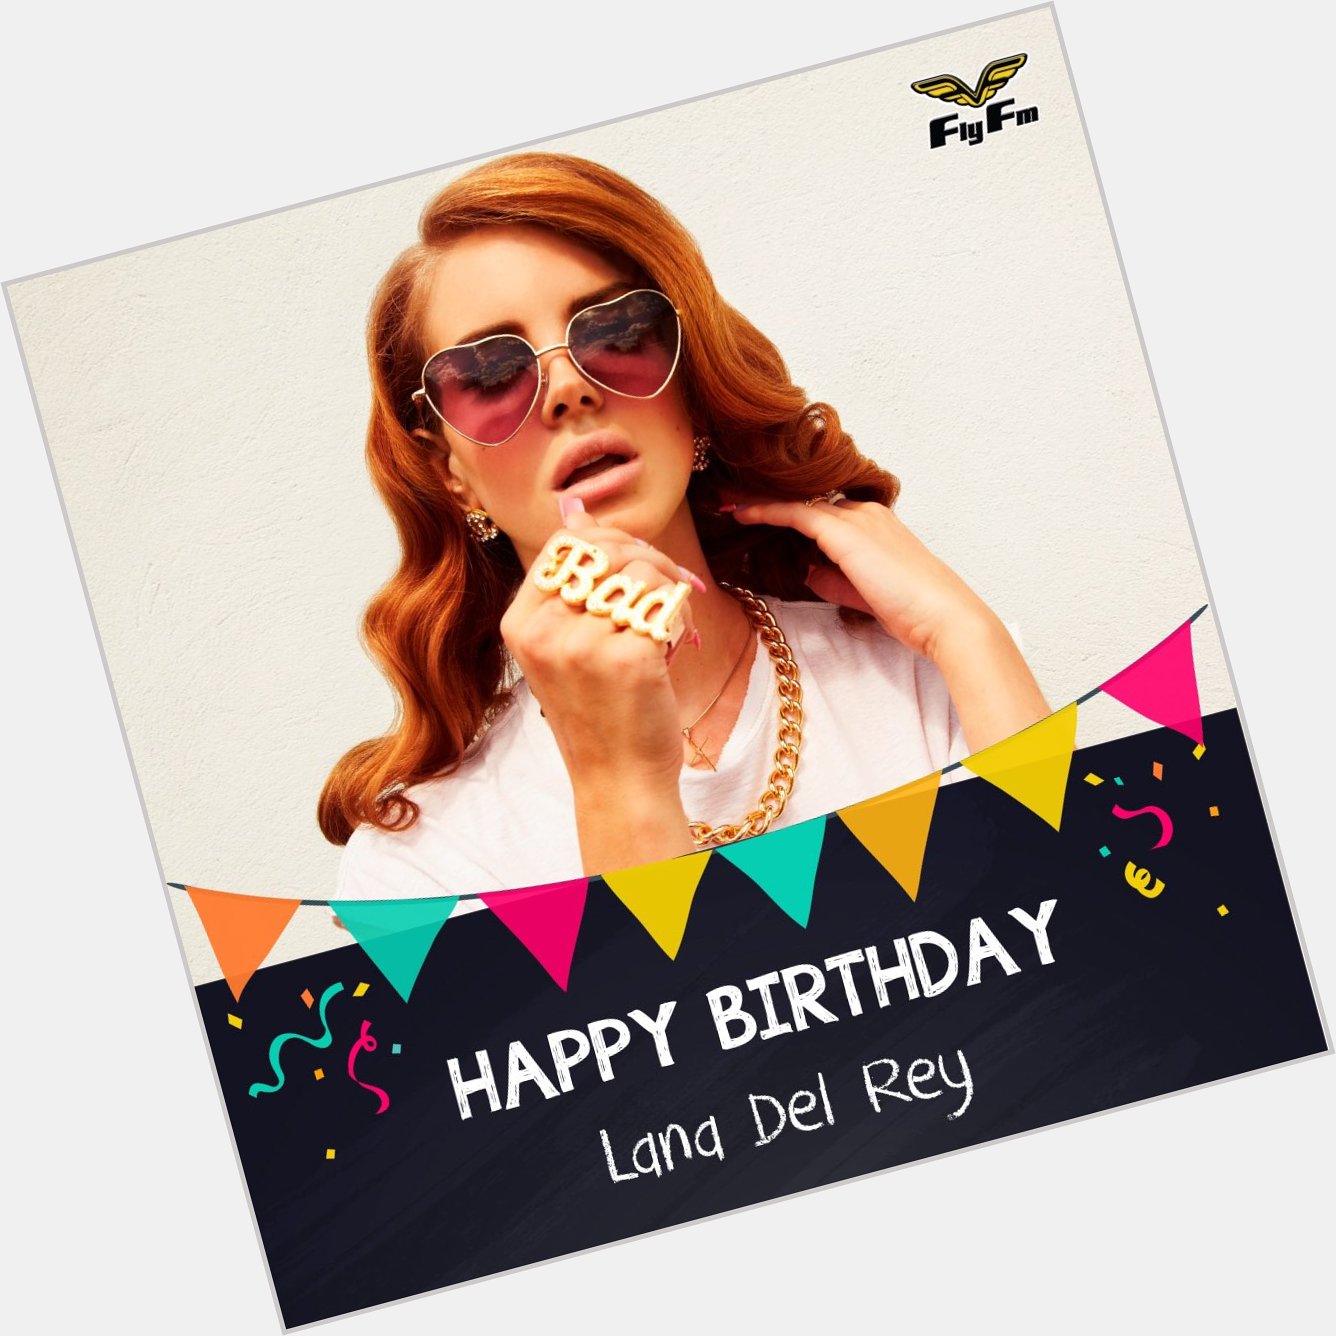 It\s time to celebrate the beautiful Lana Del Rey\s birthday! A HAPPY 32nd BIRTHDAY to the singer!! 